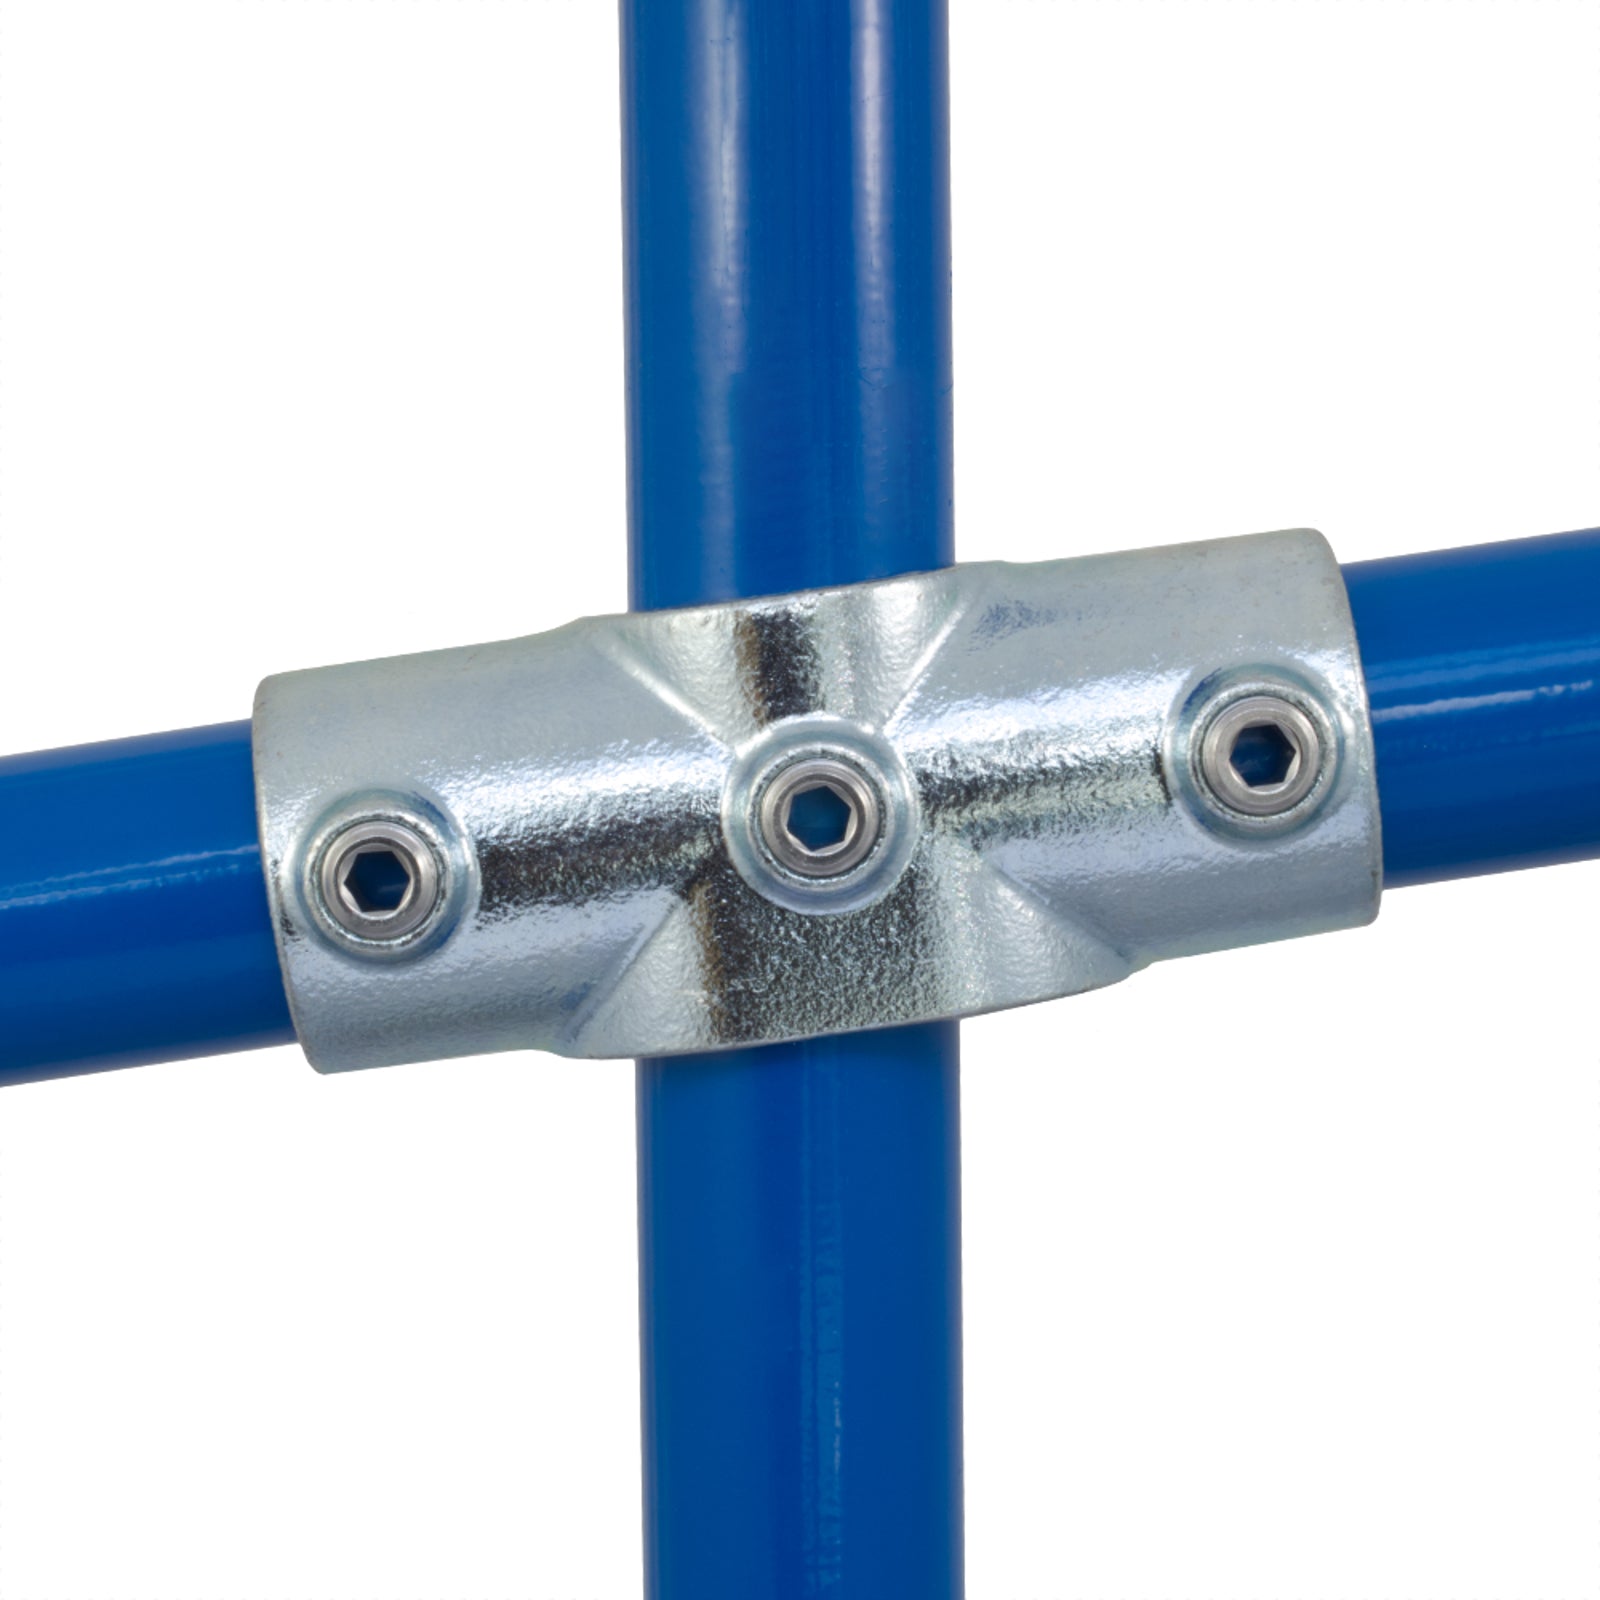 Slope Cross - 0 to 11 Degrees by Interclamp, Code 156. Shop rail and pipe fittings online chain.com.au. Australia wide shipping.